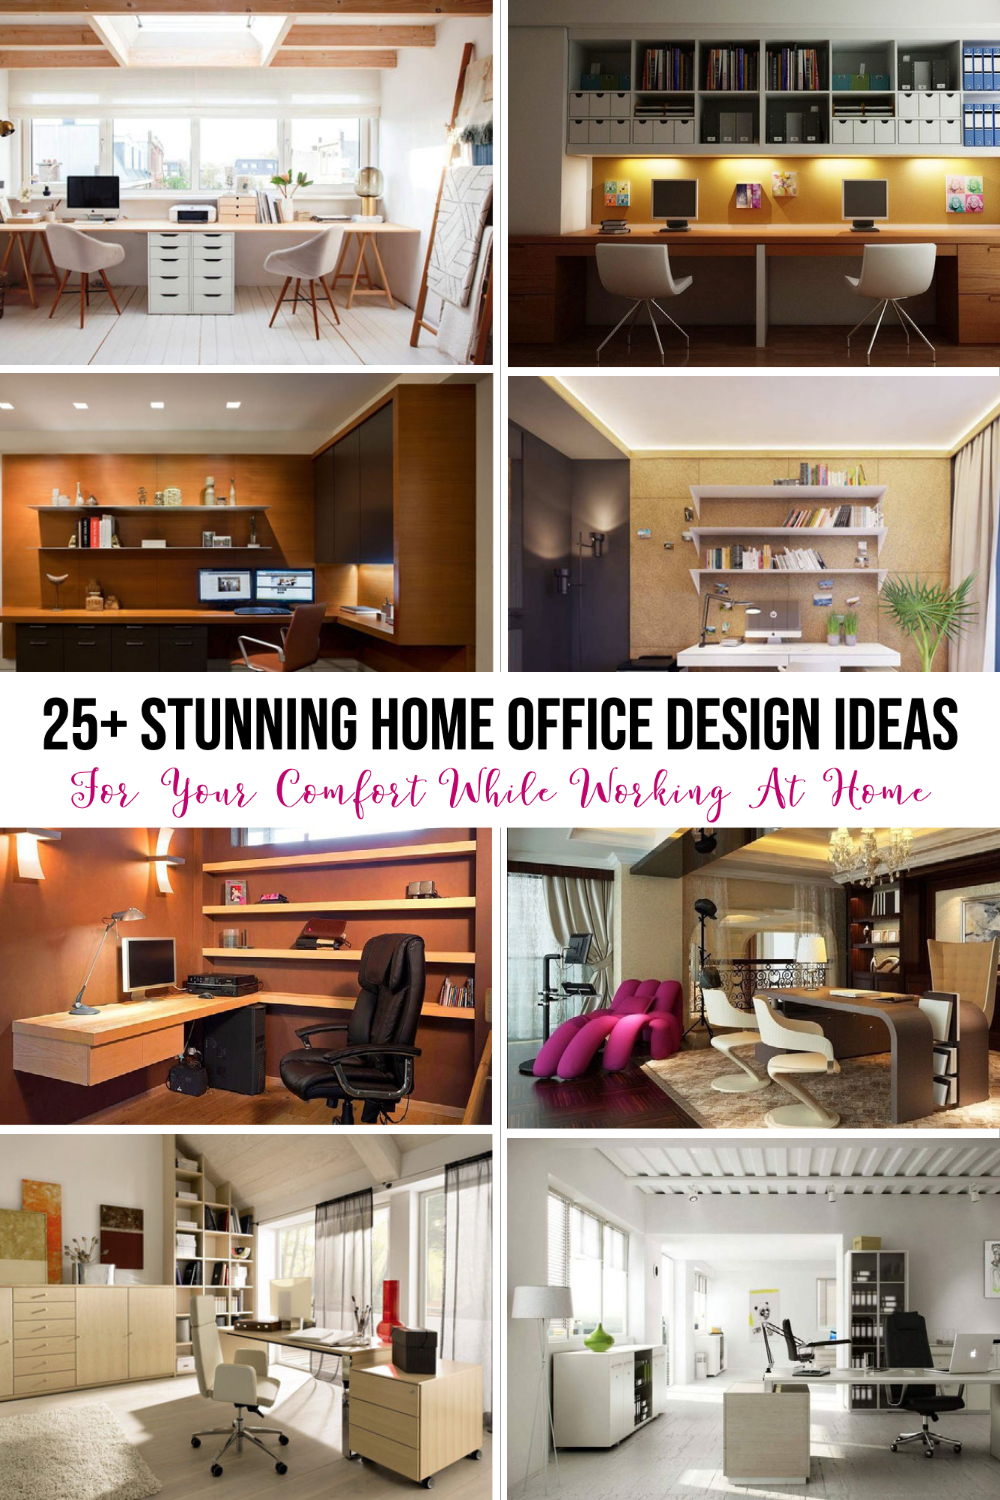 Stunning Home Office Design Ideas For Your Comfort While Working At Home